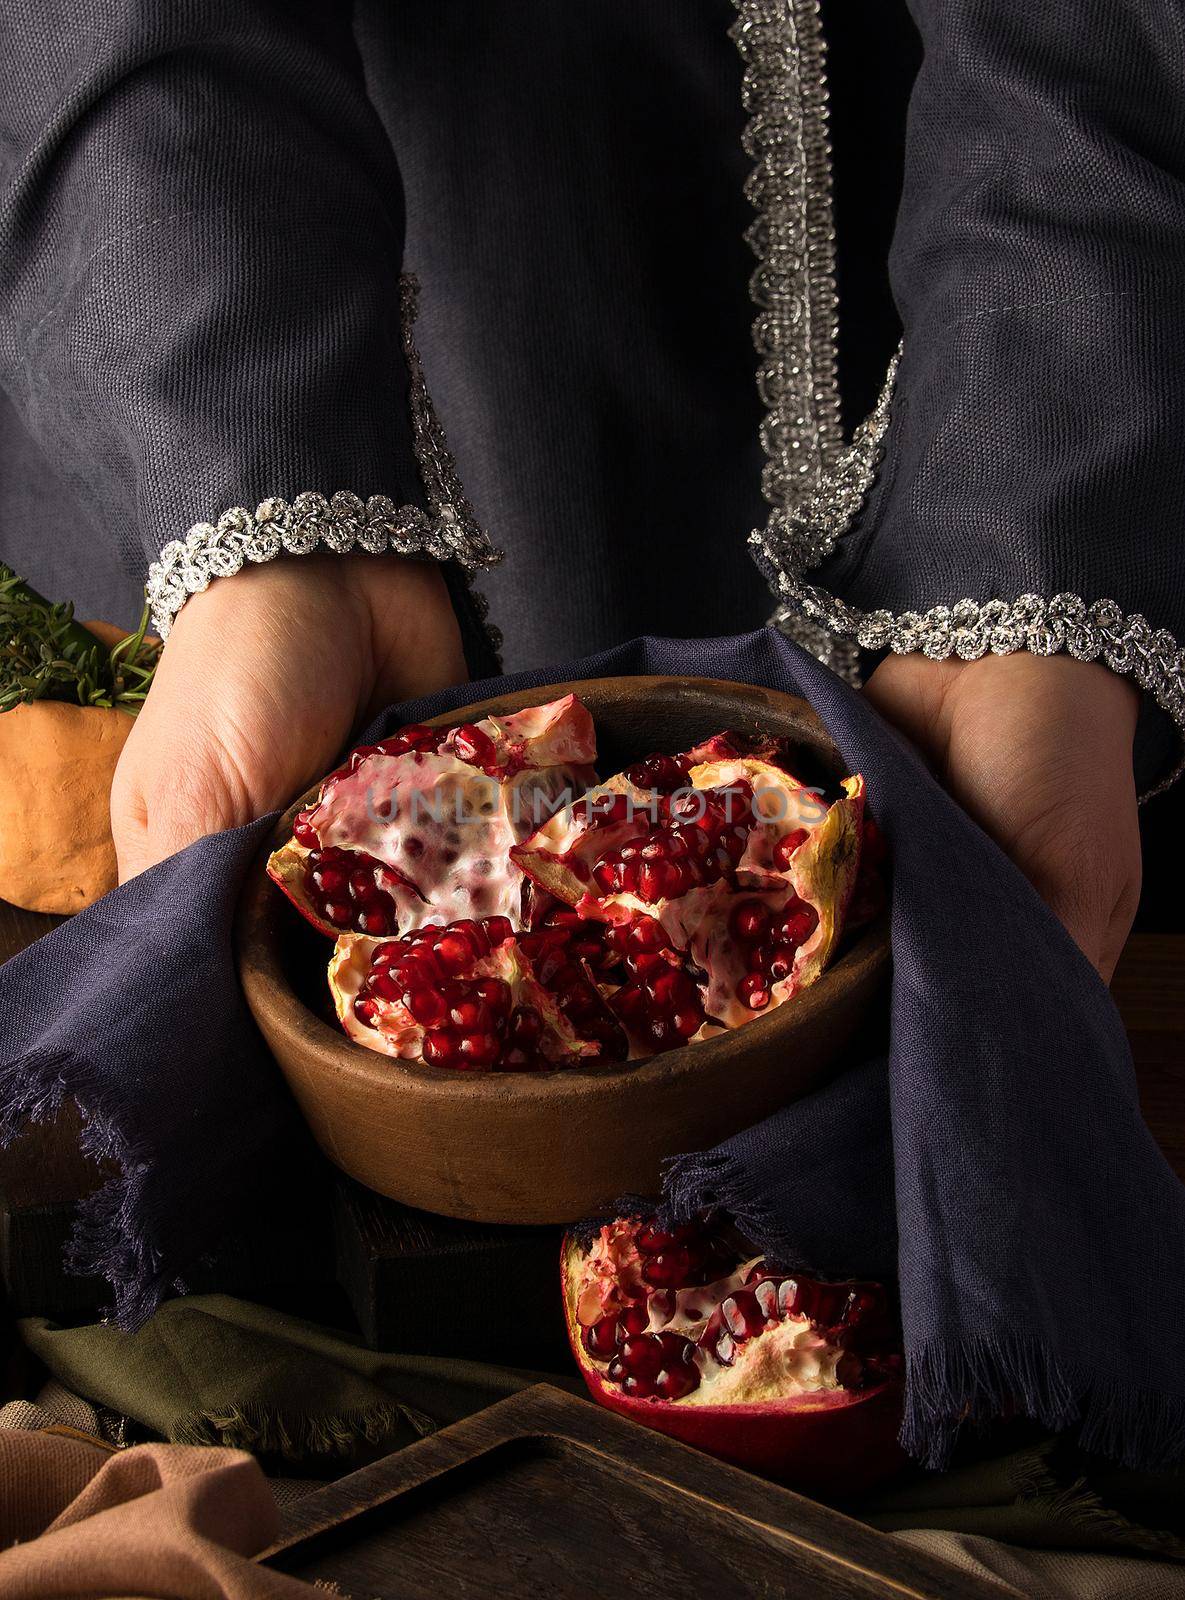 A vertical photo of woman's hands holding a bowl of pomegranate